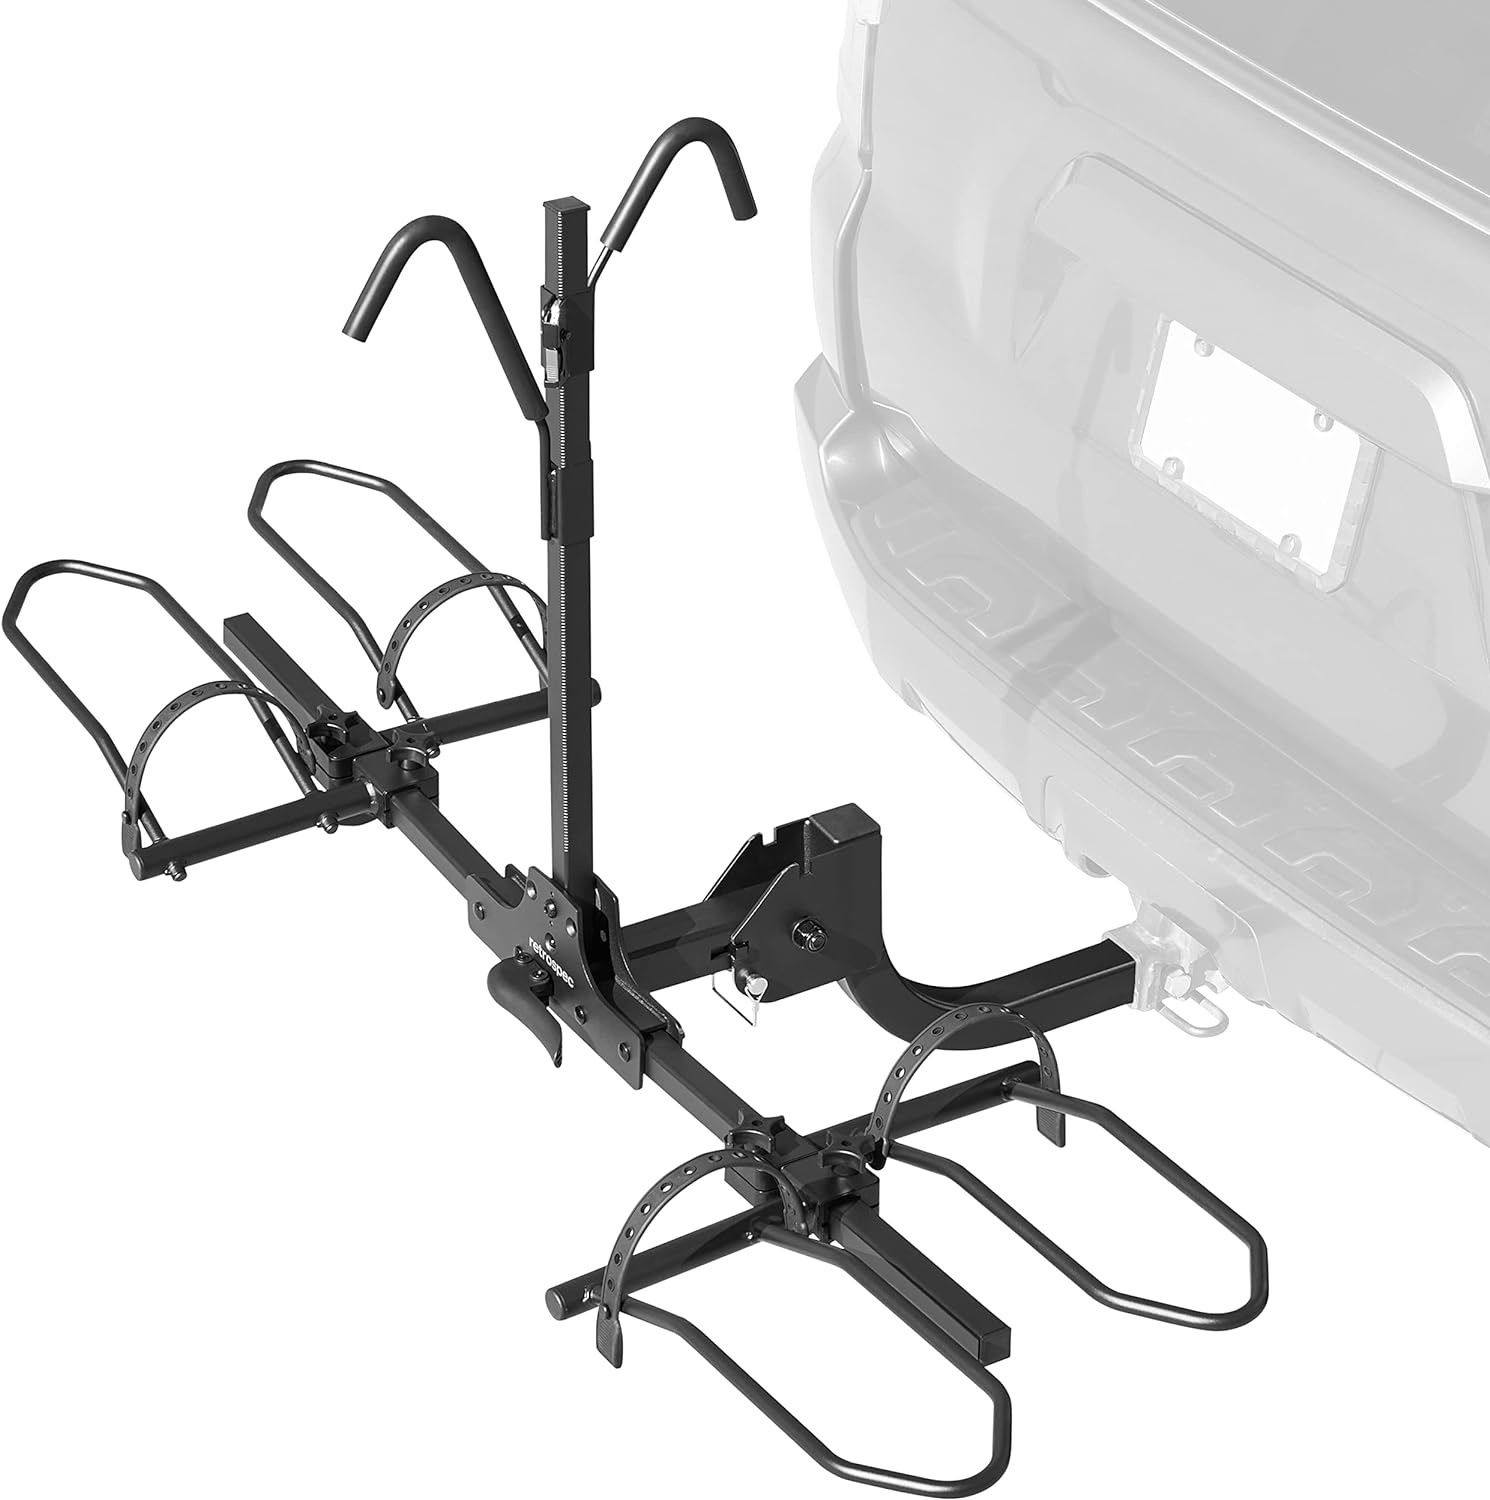 2-E-Bike Hitch Mount Rack for Cars, Trucks, SUVs - 160lb Max Weight, Accommodates Electric Bikes with 20-29" Wheels - Foldable, Anti-Rattle, Compatibl